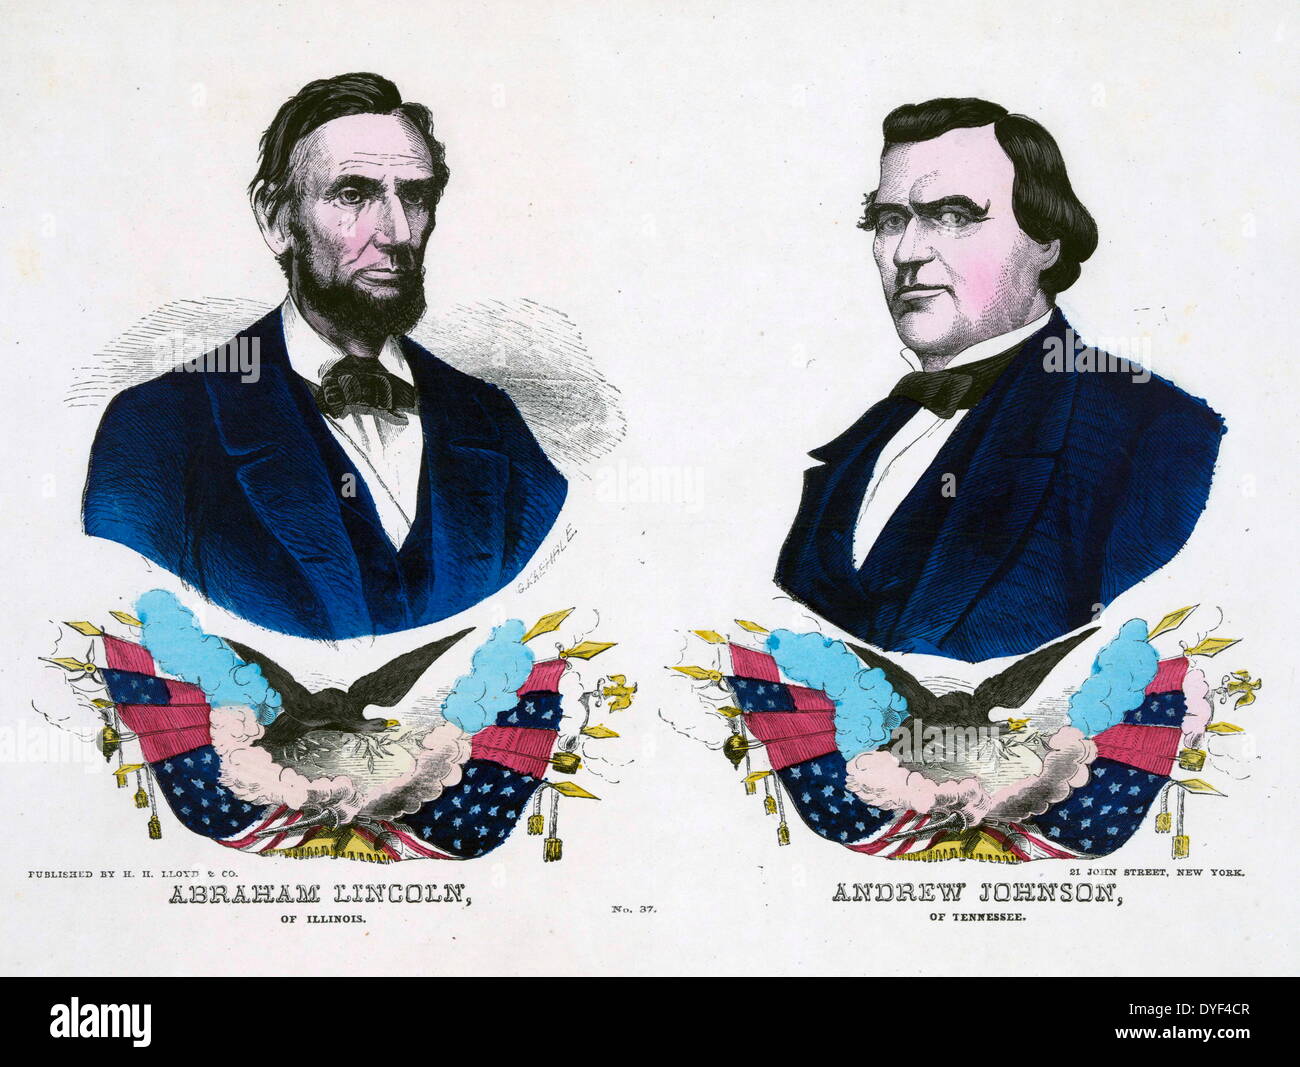 campaign banner for the Republican ticket in the 1864 presidential election. President Abraham Lincoln and Andrew Johnson. Stock Photo